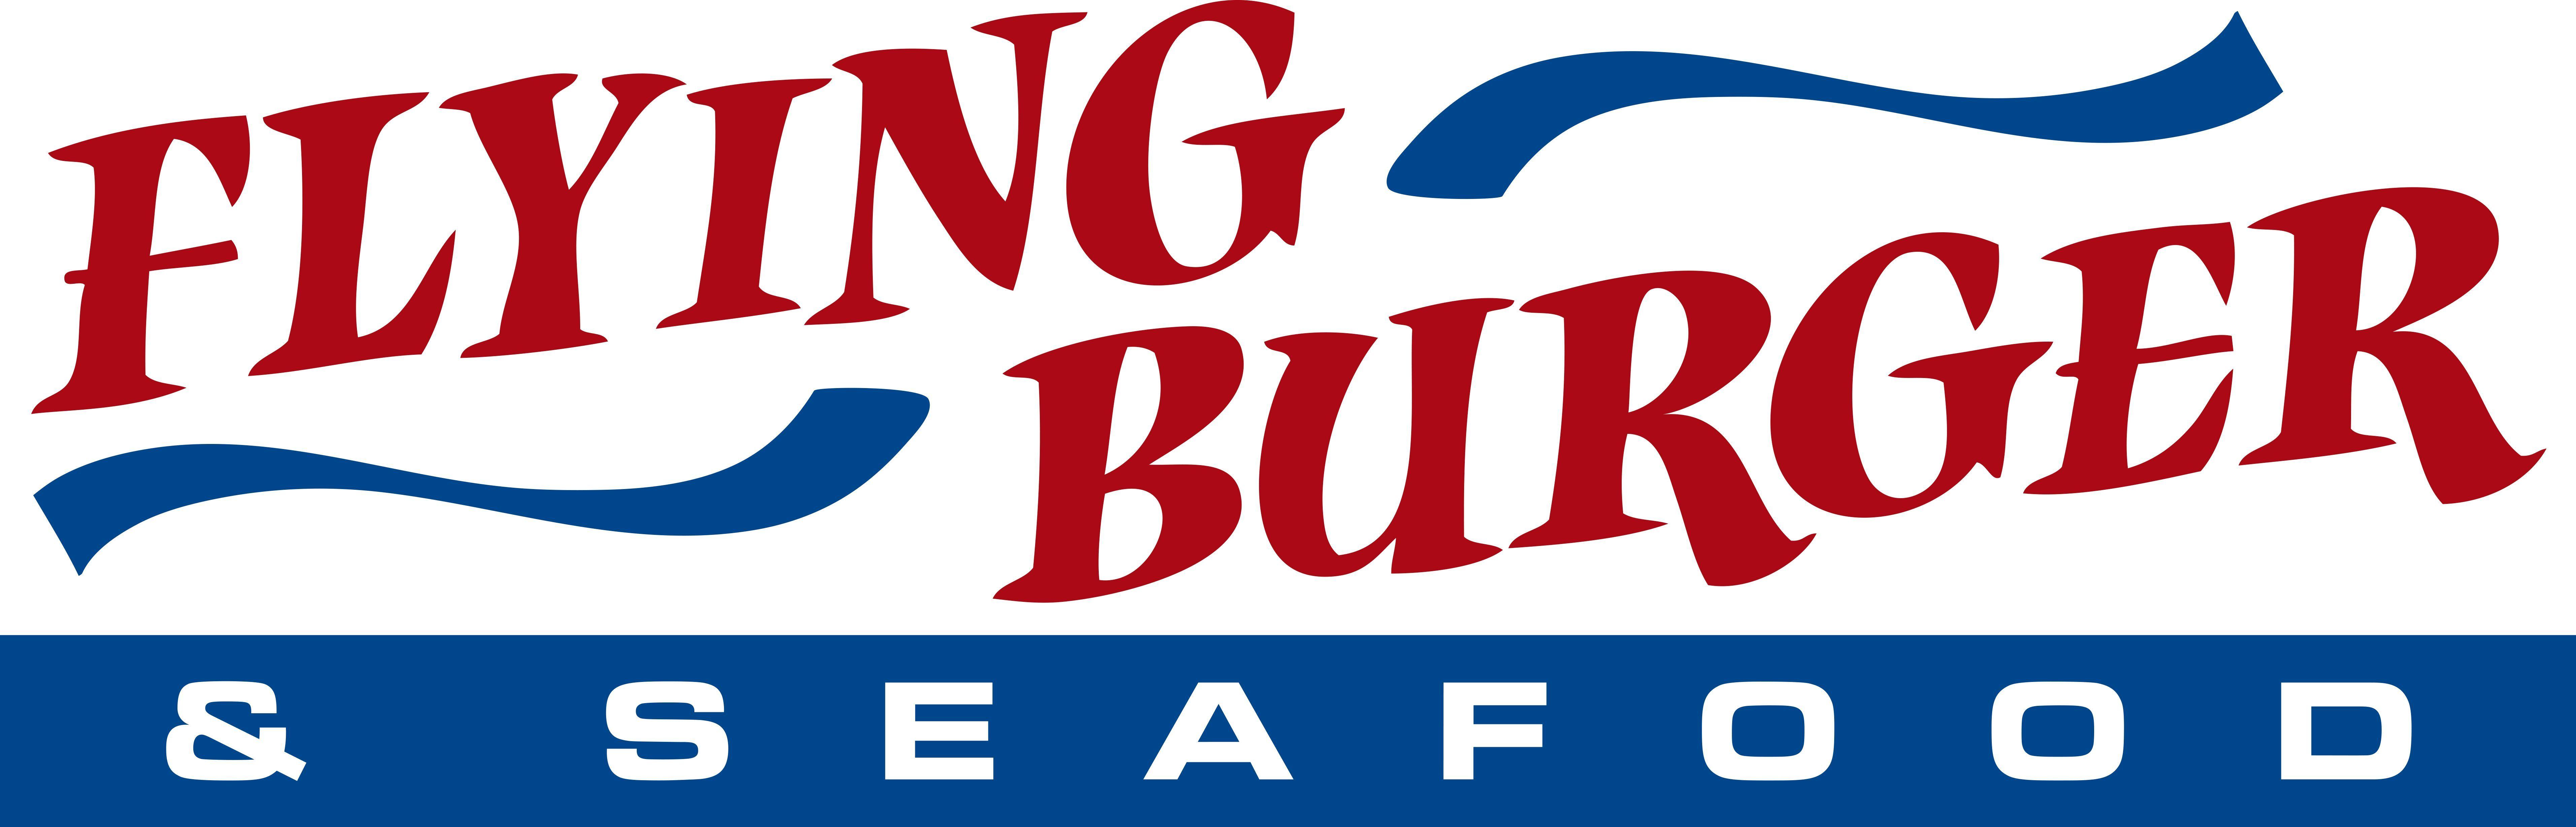 All Burger Places Logo - Home